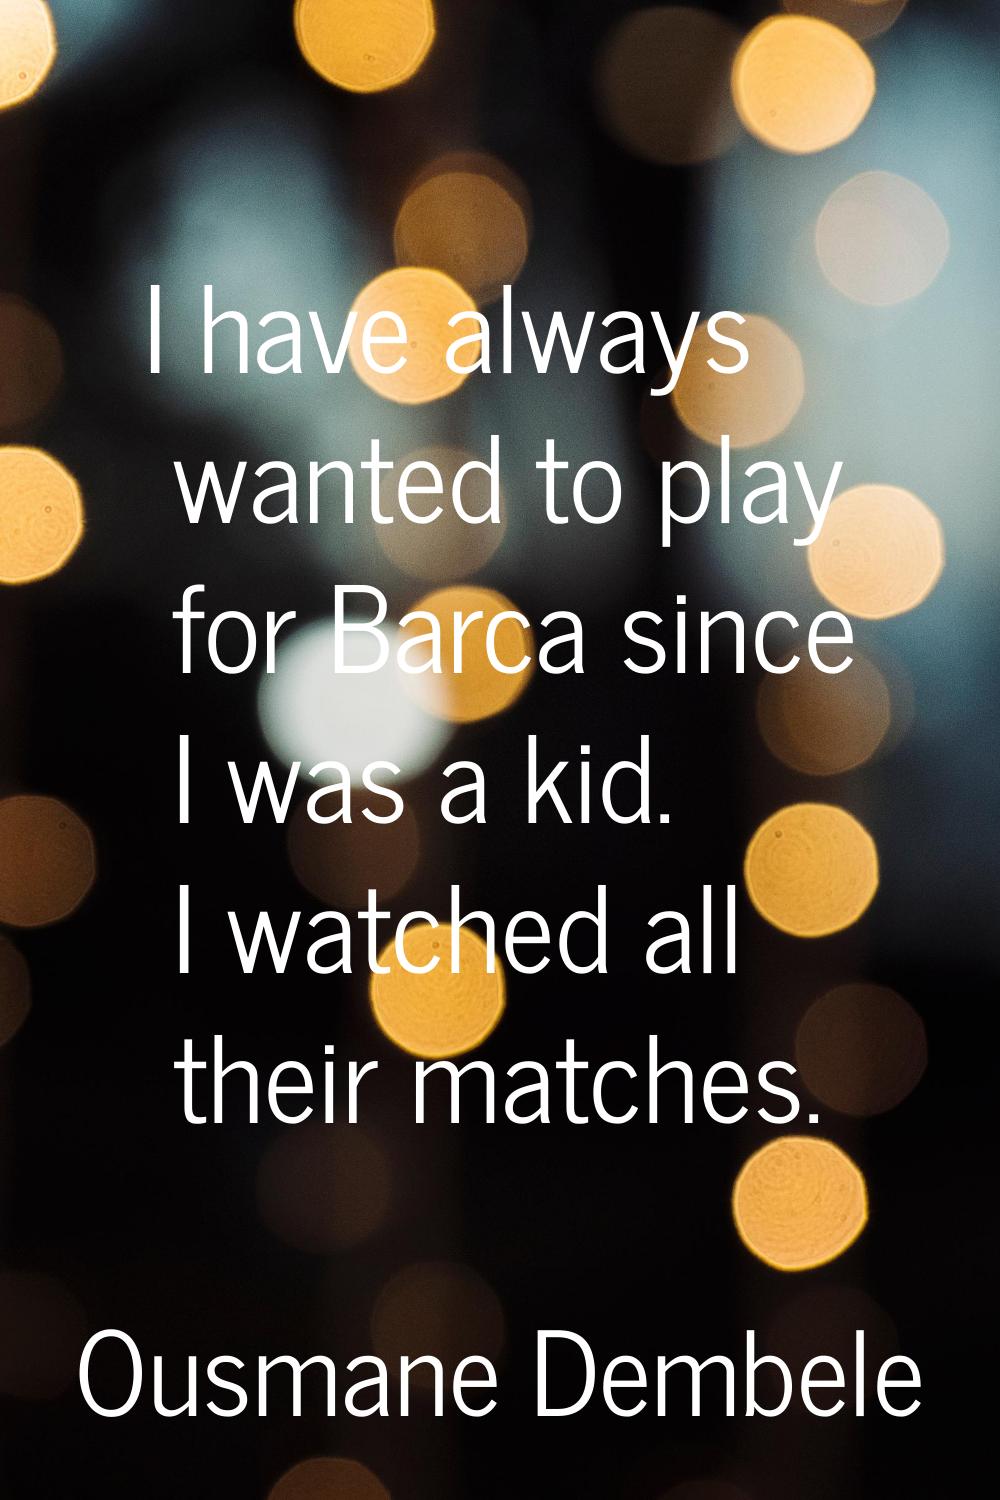 I have always wanted to play for Barca since I was a kid. I watched all their matches.